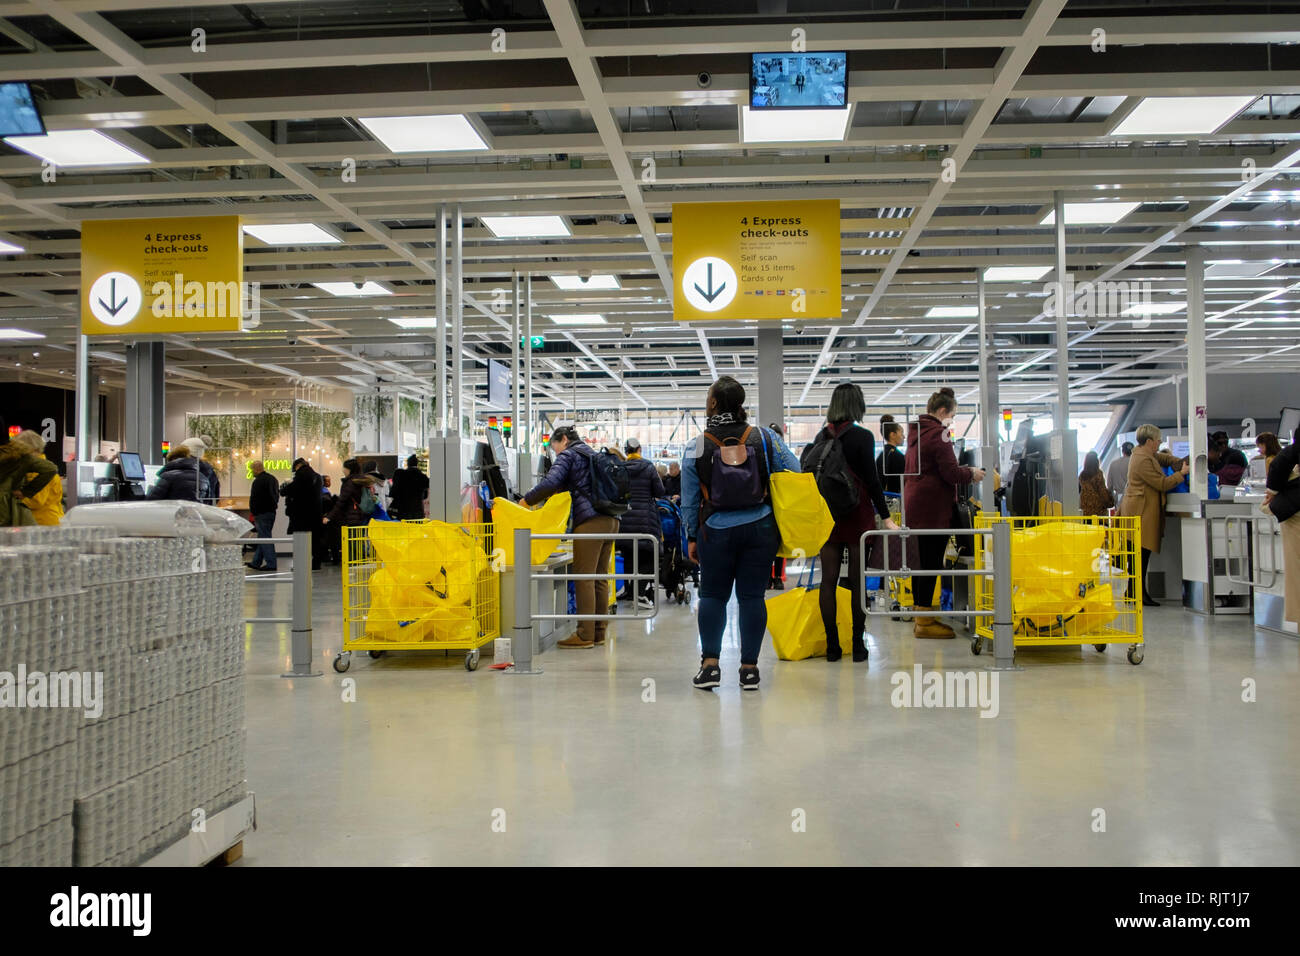 London, UK. 7th February 2019. Swedish furniture and household goods company IKEA opens its new store in Greenwich, South East London. The new store becomes the fourth to be opened in the London area and is claimed to be the most environmentally sustainable of the company's outlets in the UK. Pictured: Check-out area of IKEA Greenwich store. Credit: mark phillips/Alamy Live News Stock Photo